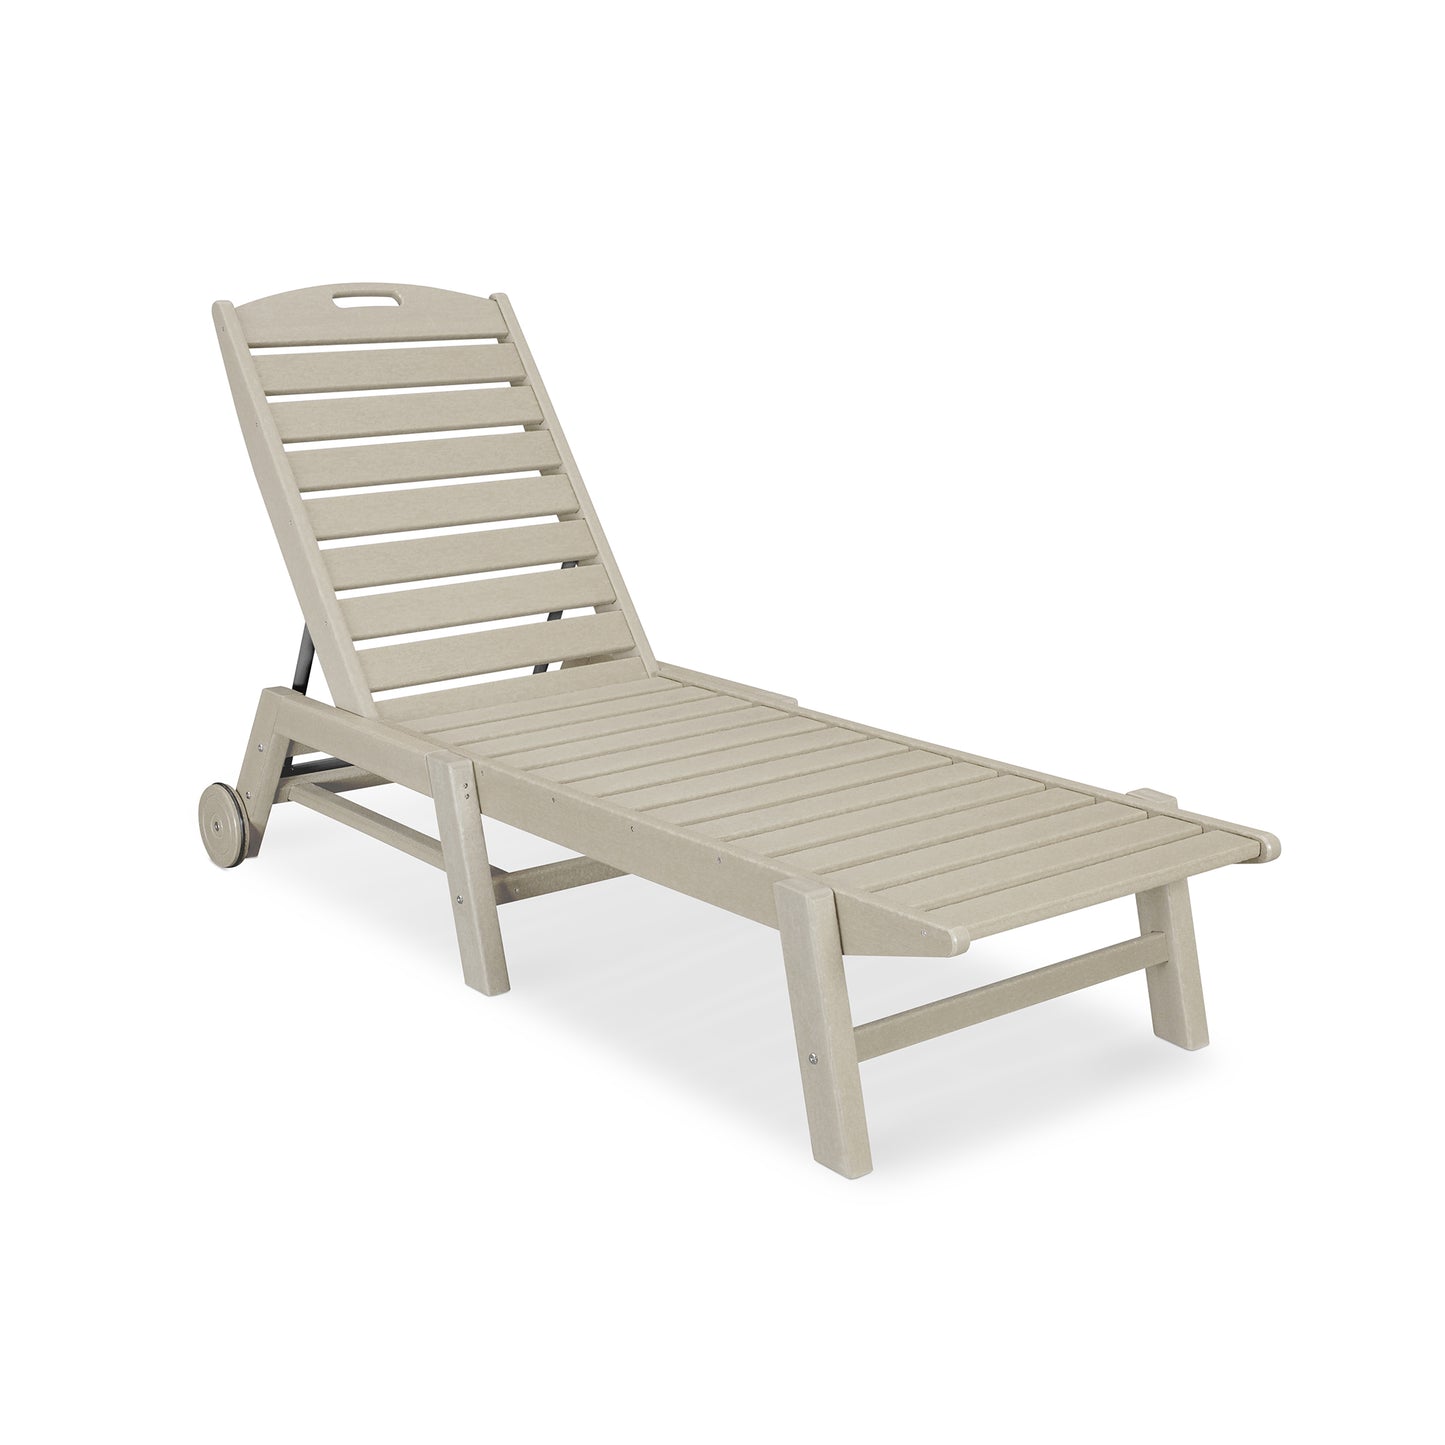 A beige, adjustable outdoor pool furniture POLYWOOD Nautical Wheeled Chaise - Stackable with wheels placed on a plain white background.